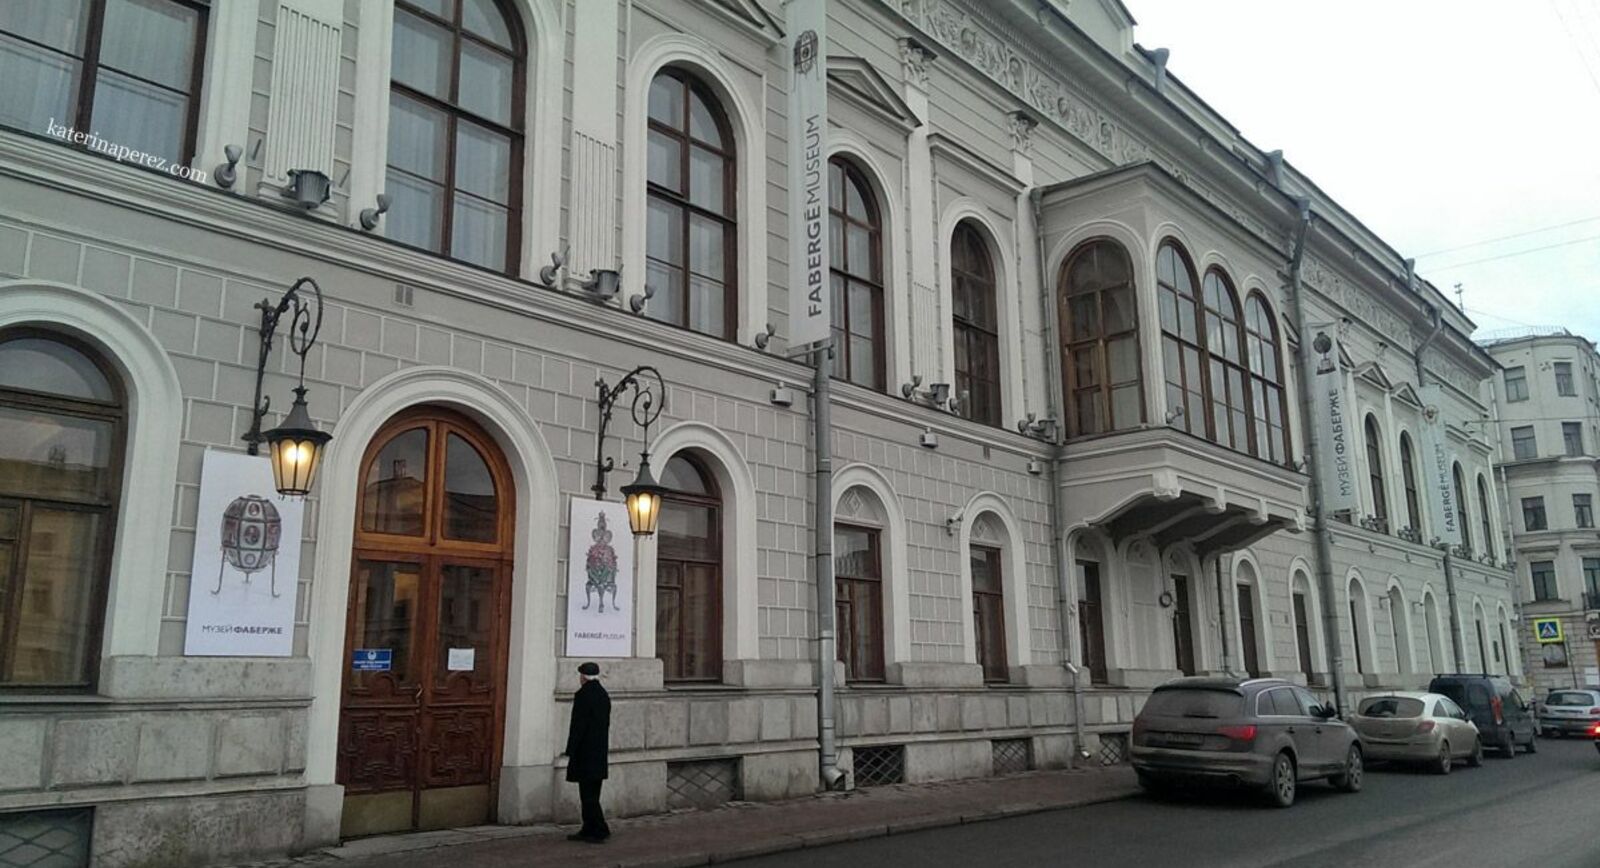 The Fabergé Museum in St.Peterburg and its Treasures